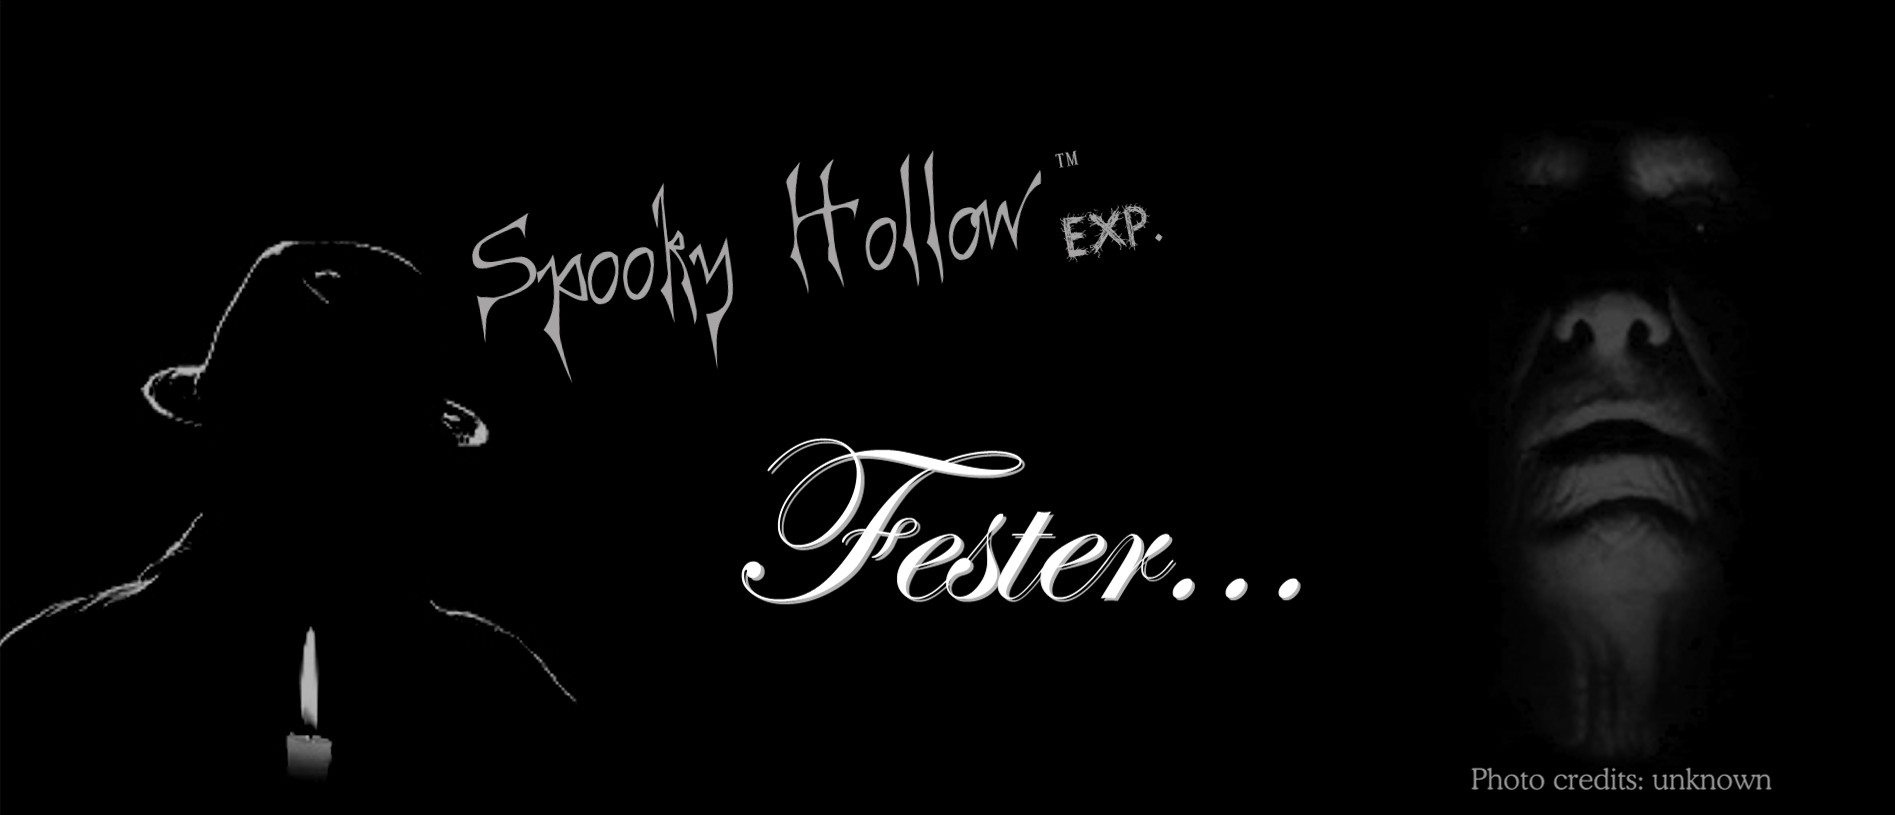 Spooky Hollow Experience Fester title